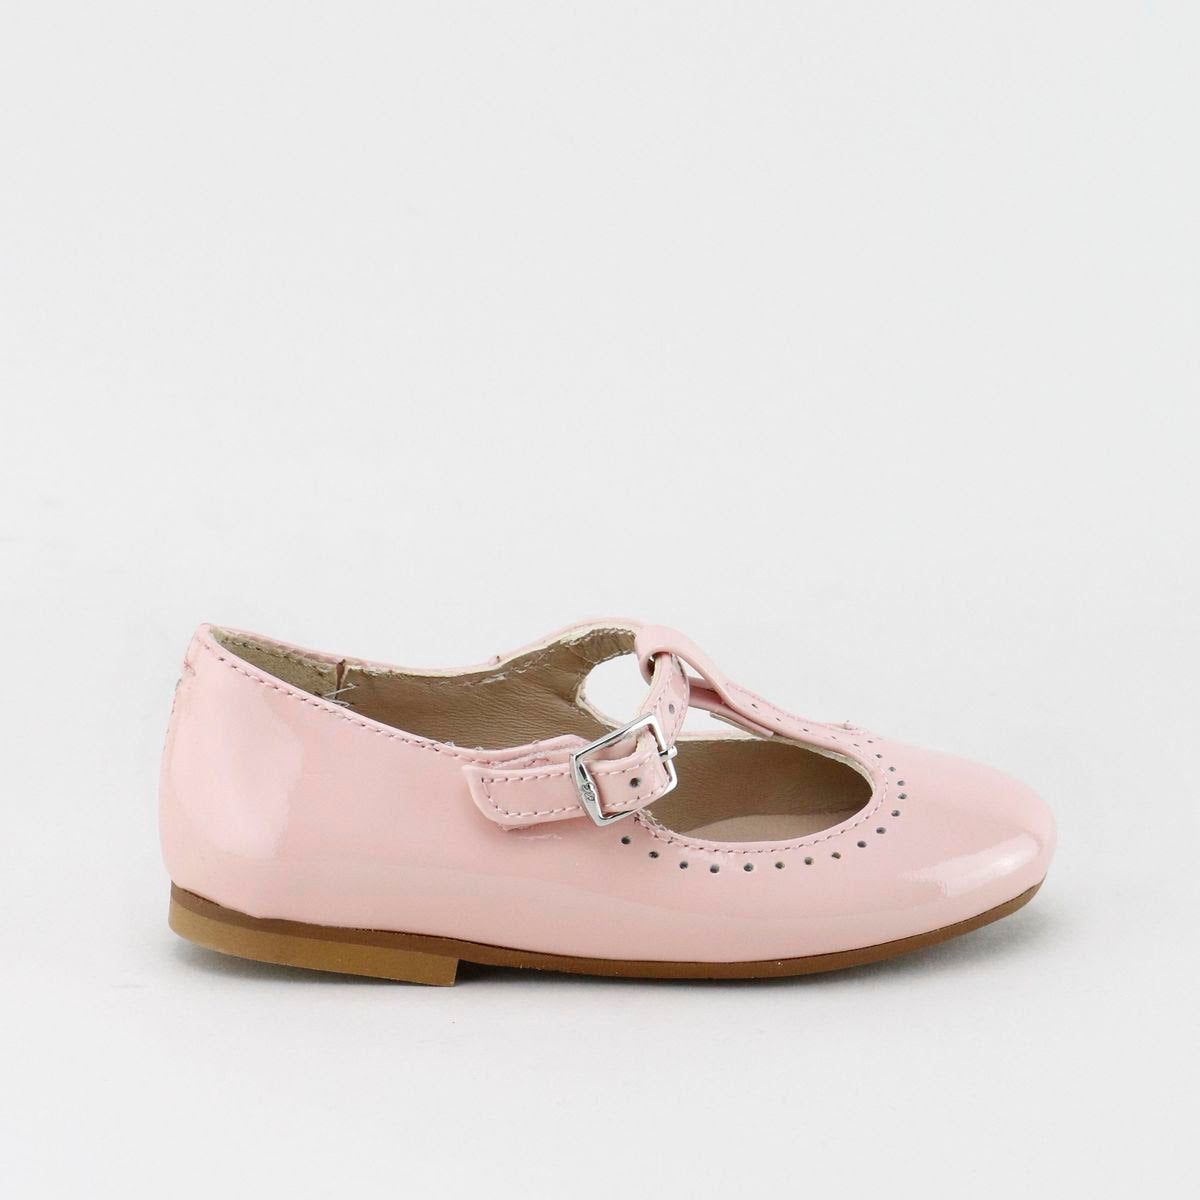 PAPANATAS LIGHT PINK PATENT LEATHER ROUNDED T-STRAP SHOE